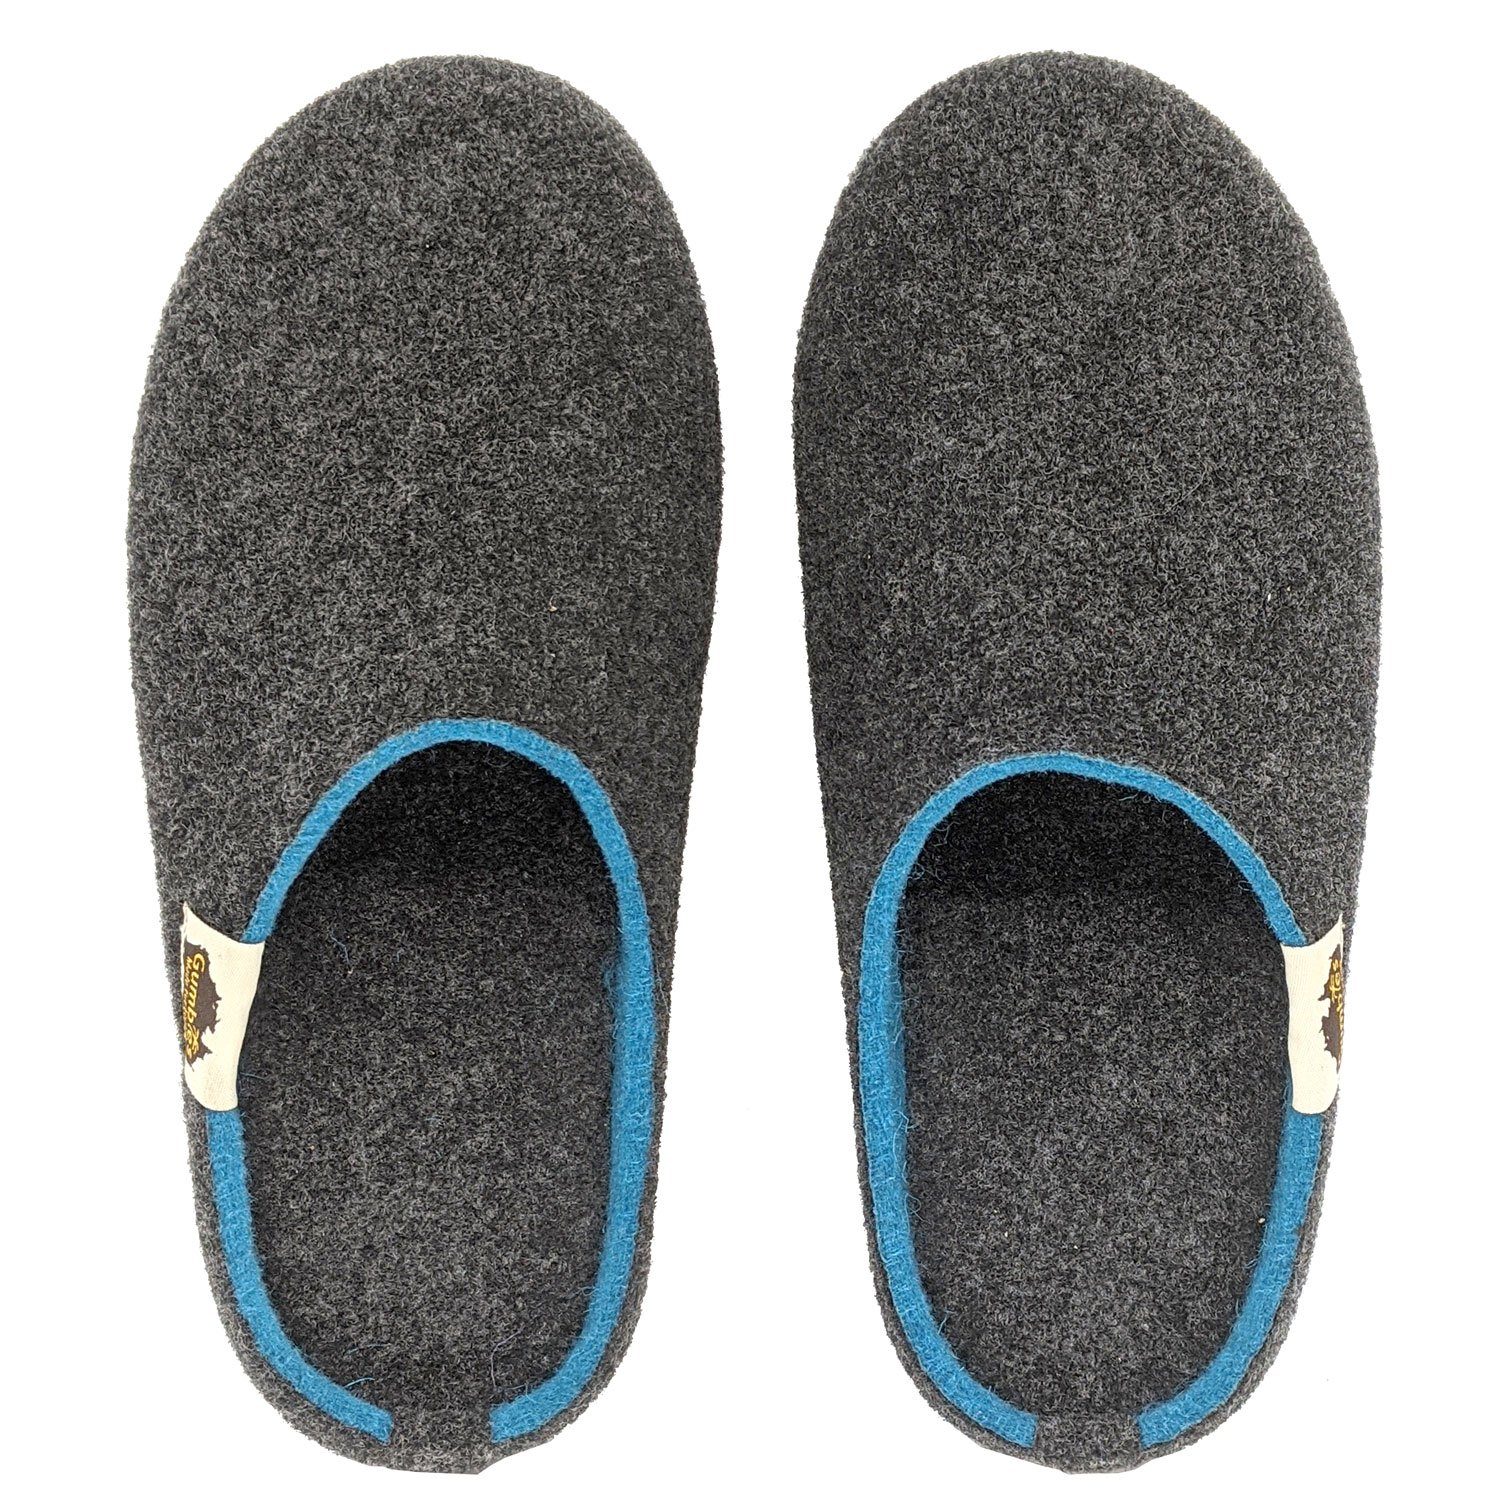 Gumbies Outback Materialien Charcoal farbenfrohen »in recycelten Turquoise Slipper in Designs« Hausschuh aus charcoal-turquoise